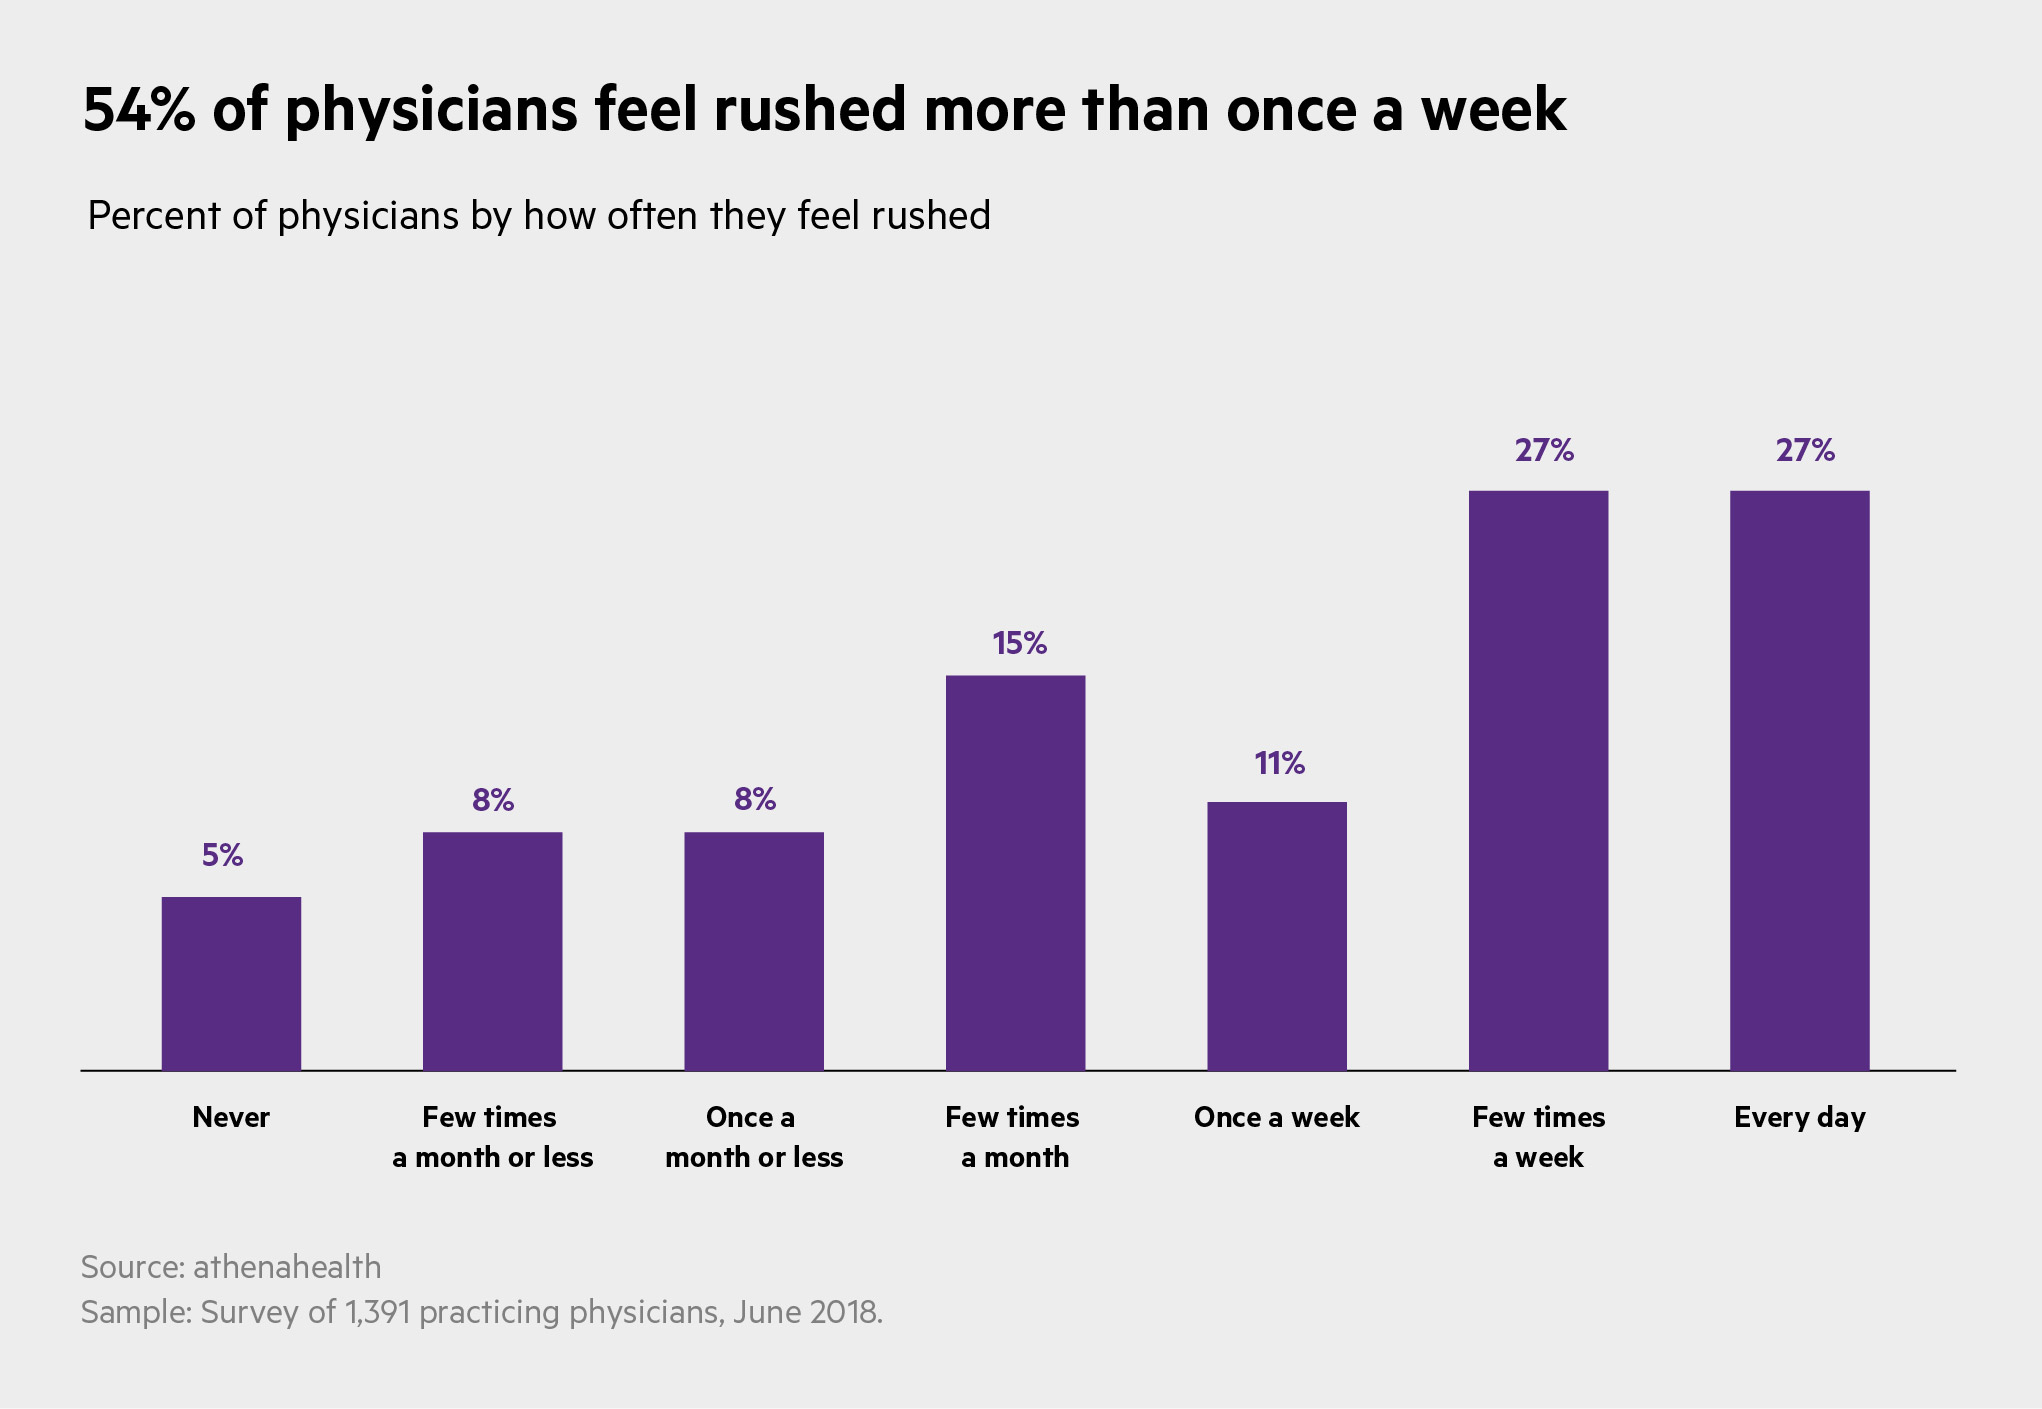 bar chart showing 54% of physicians feel rushed 